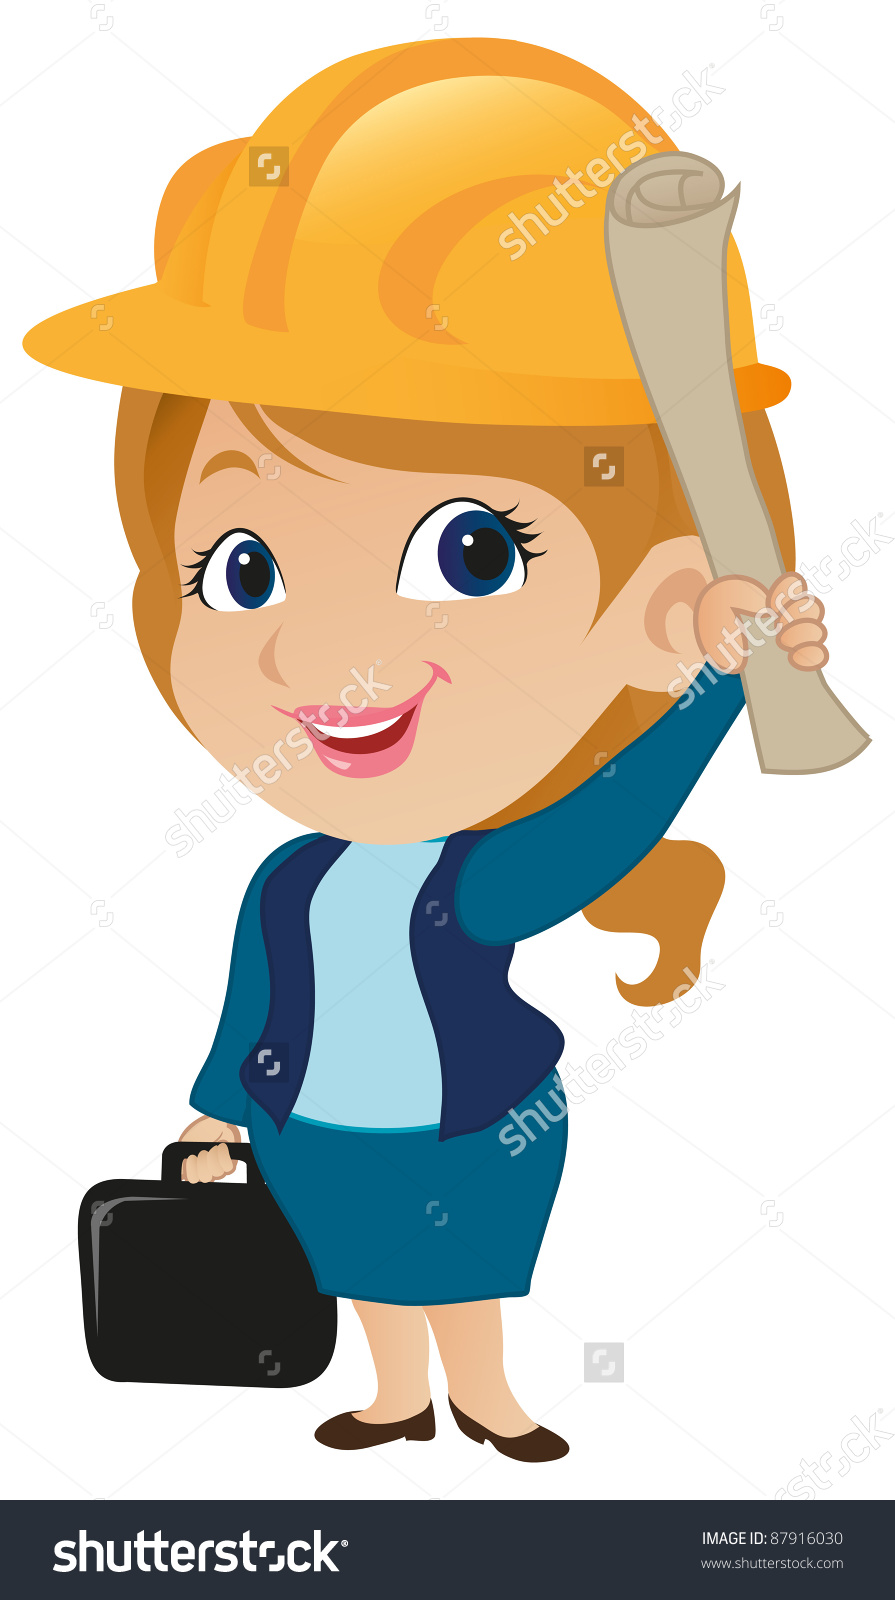 Female Architect Clipart. Save to a lightbox